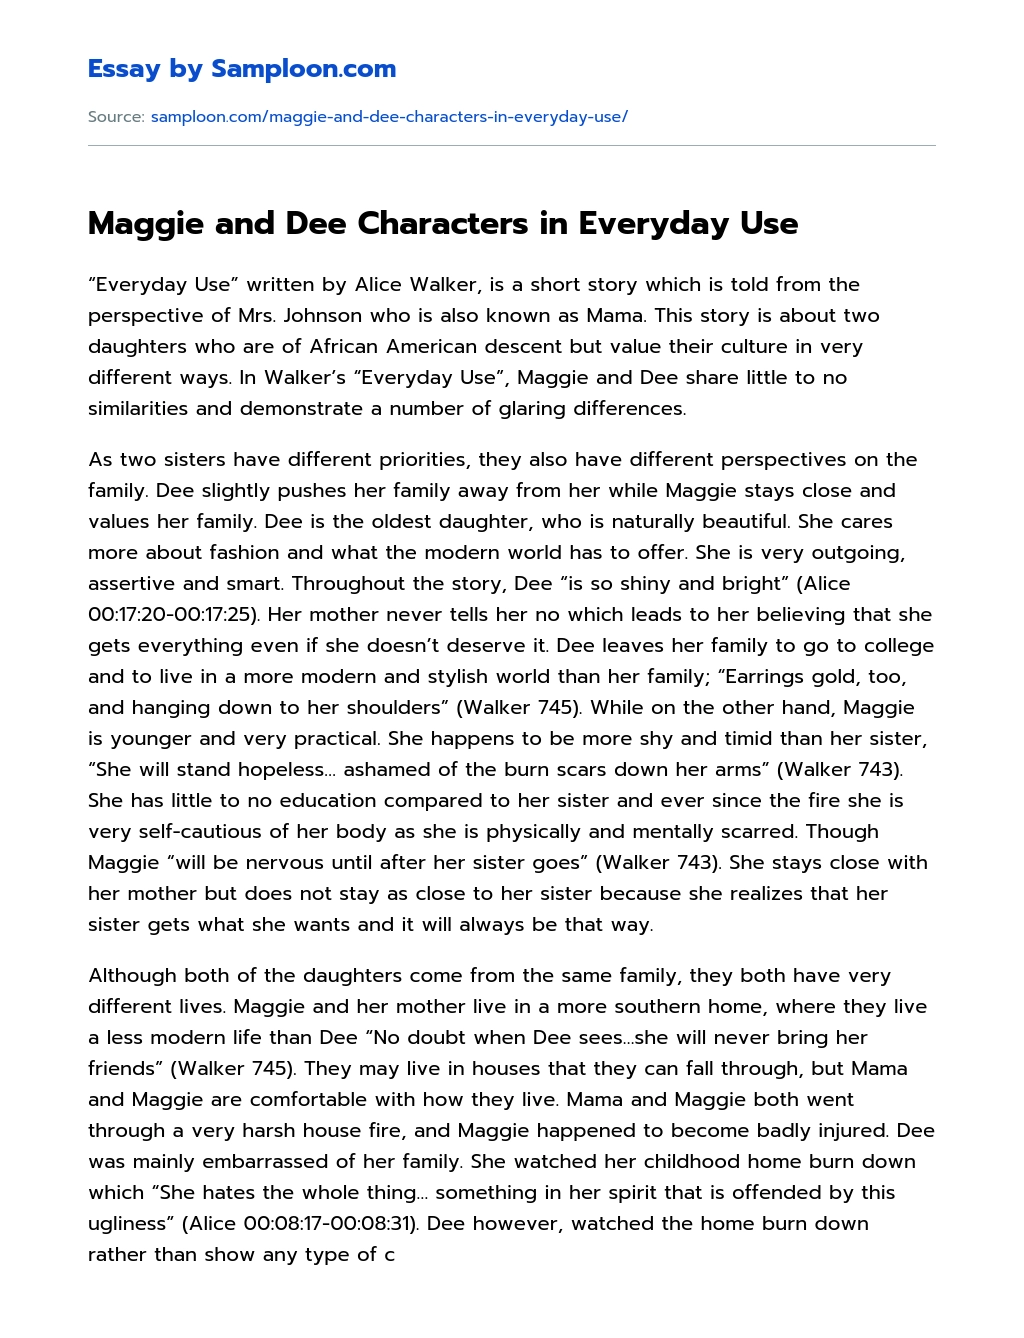 Maggie and Dee Characters in Everyday Use Summary essay